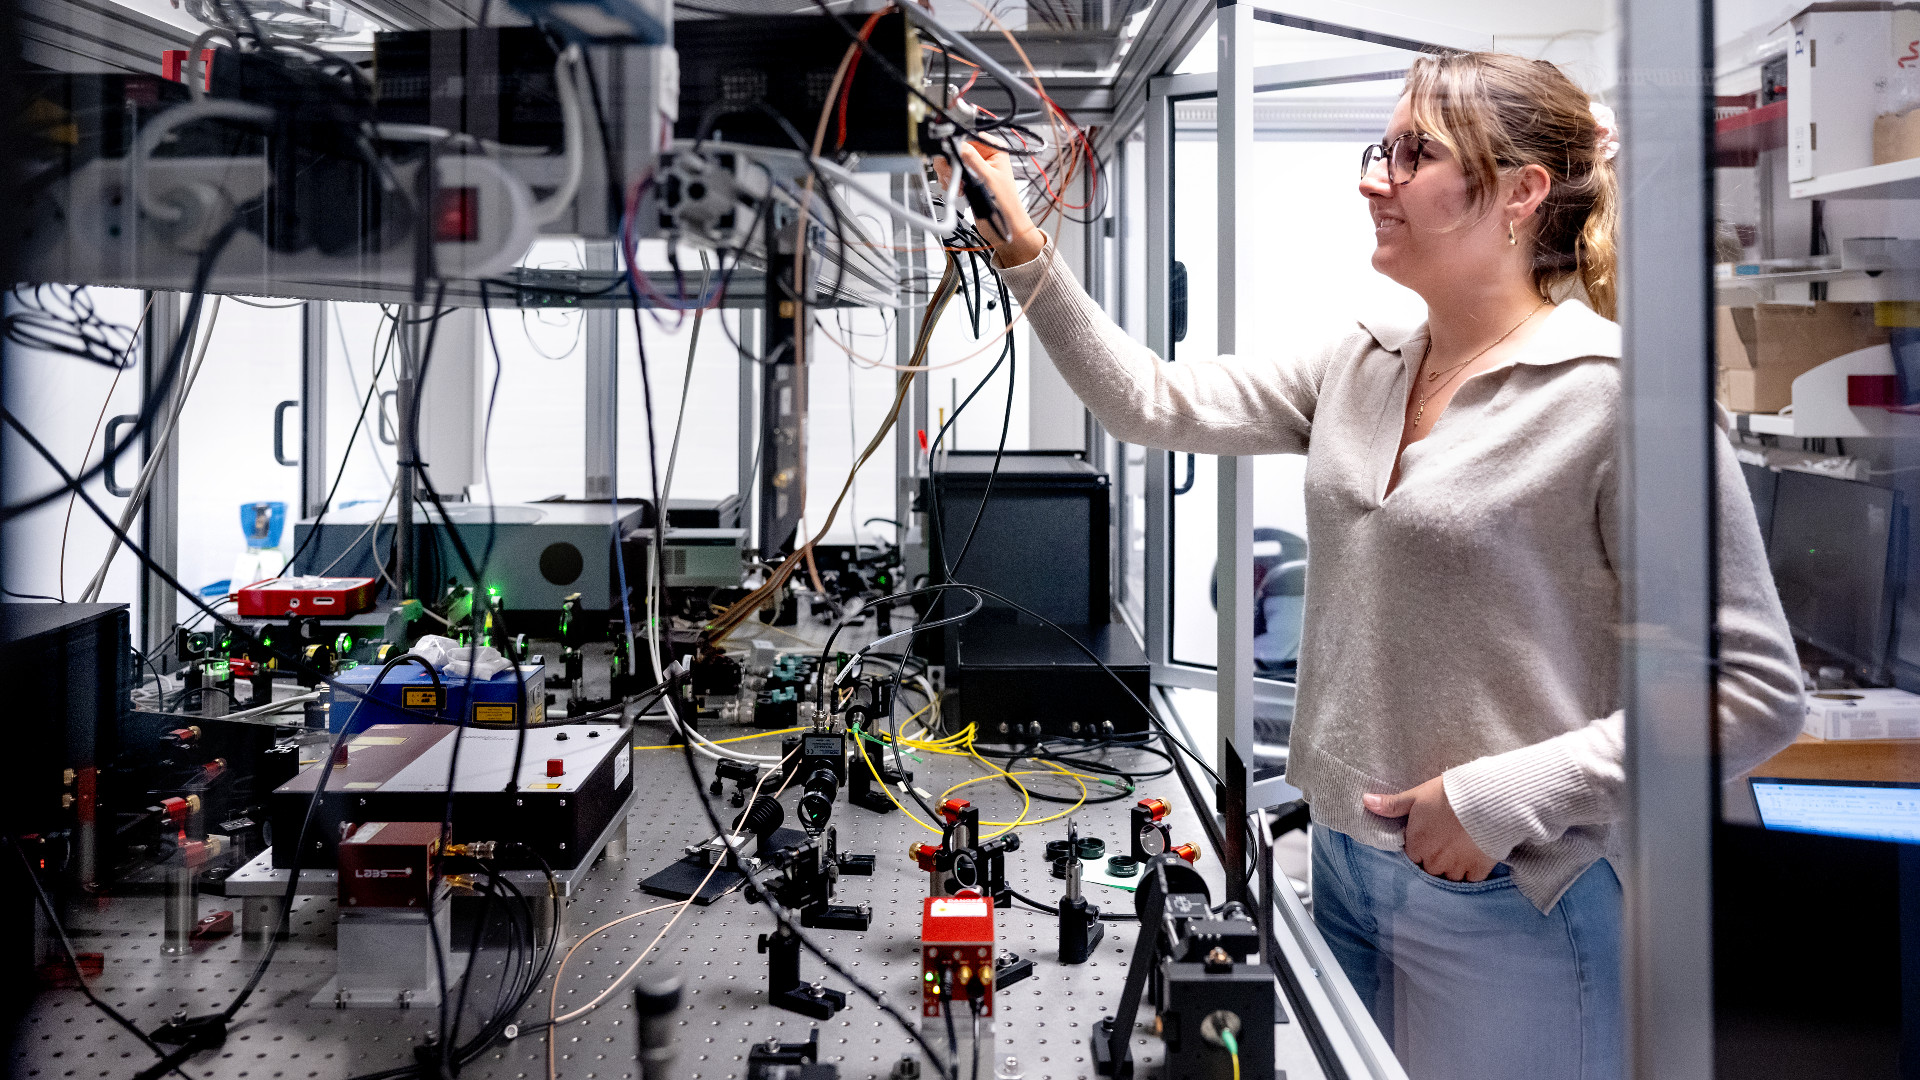 Student Dot Belin Pio, enrolled in the MSc Engineering Physics, is working on a diamond sensing setup in the laboratory of Alexander Huck. Fotograf Bax Lindhardt